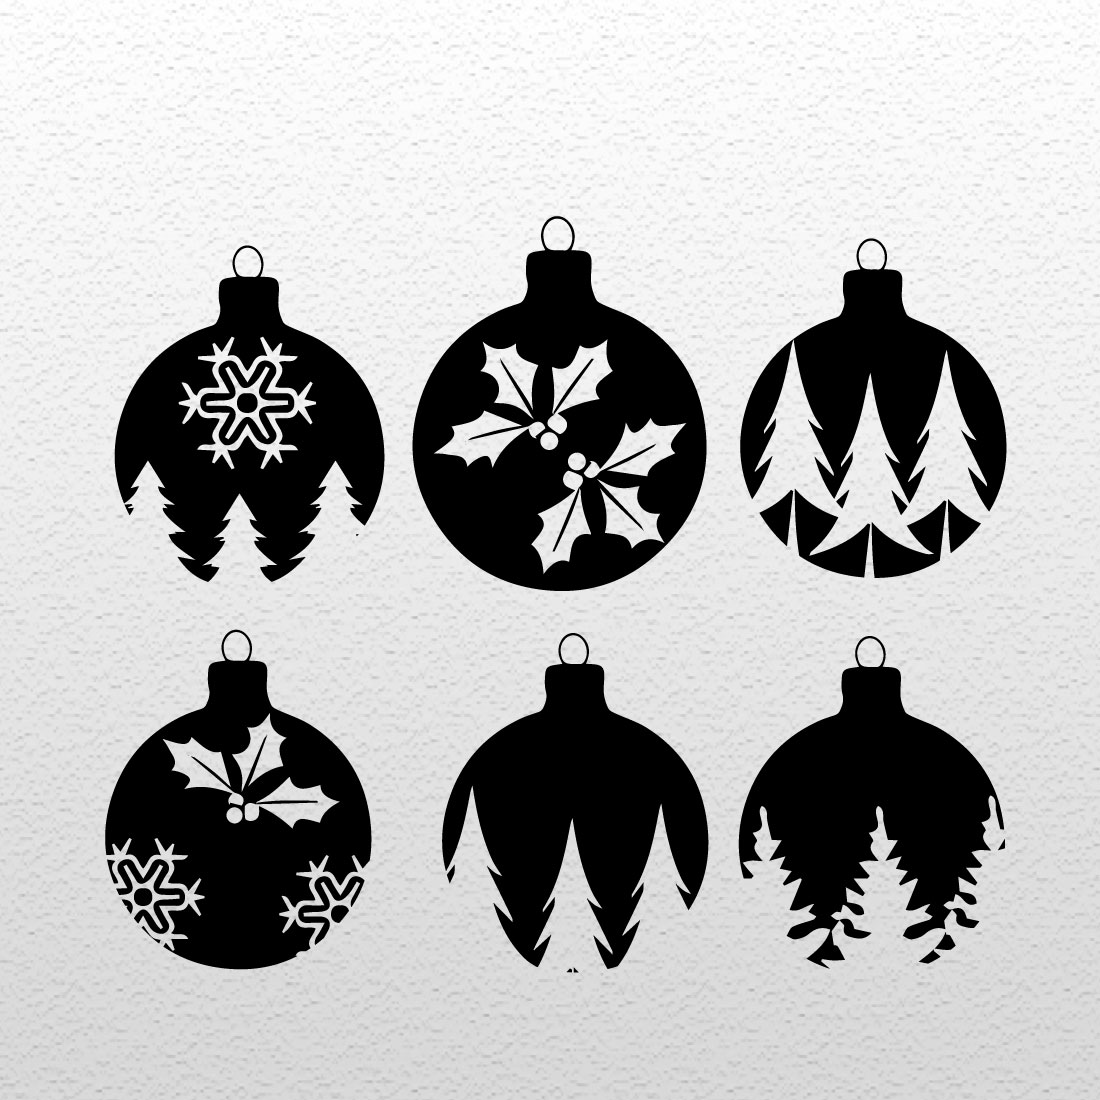 Set of black charming images of Christmas tree decorations in the shape of a ball